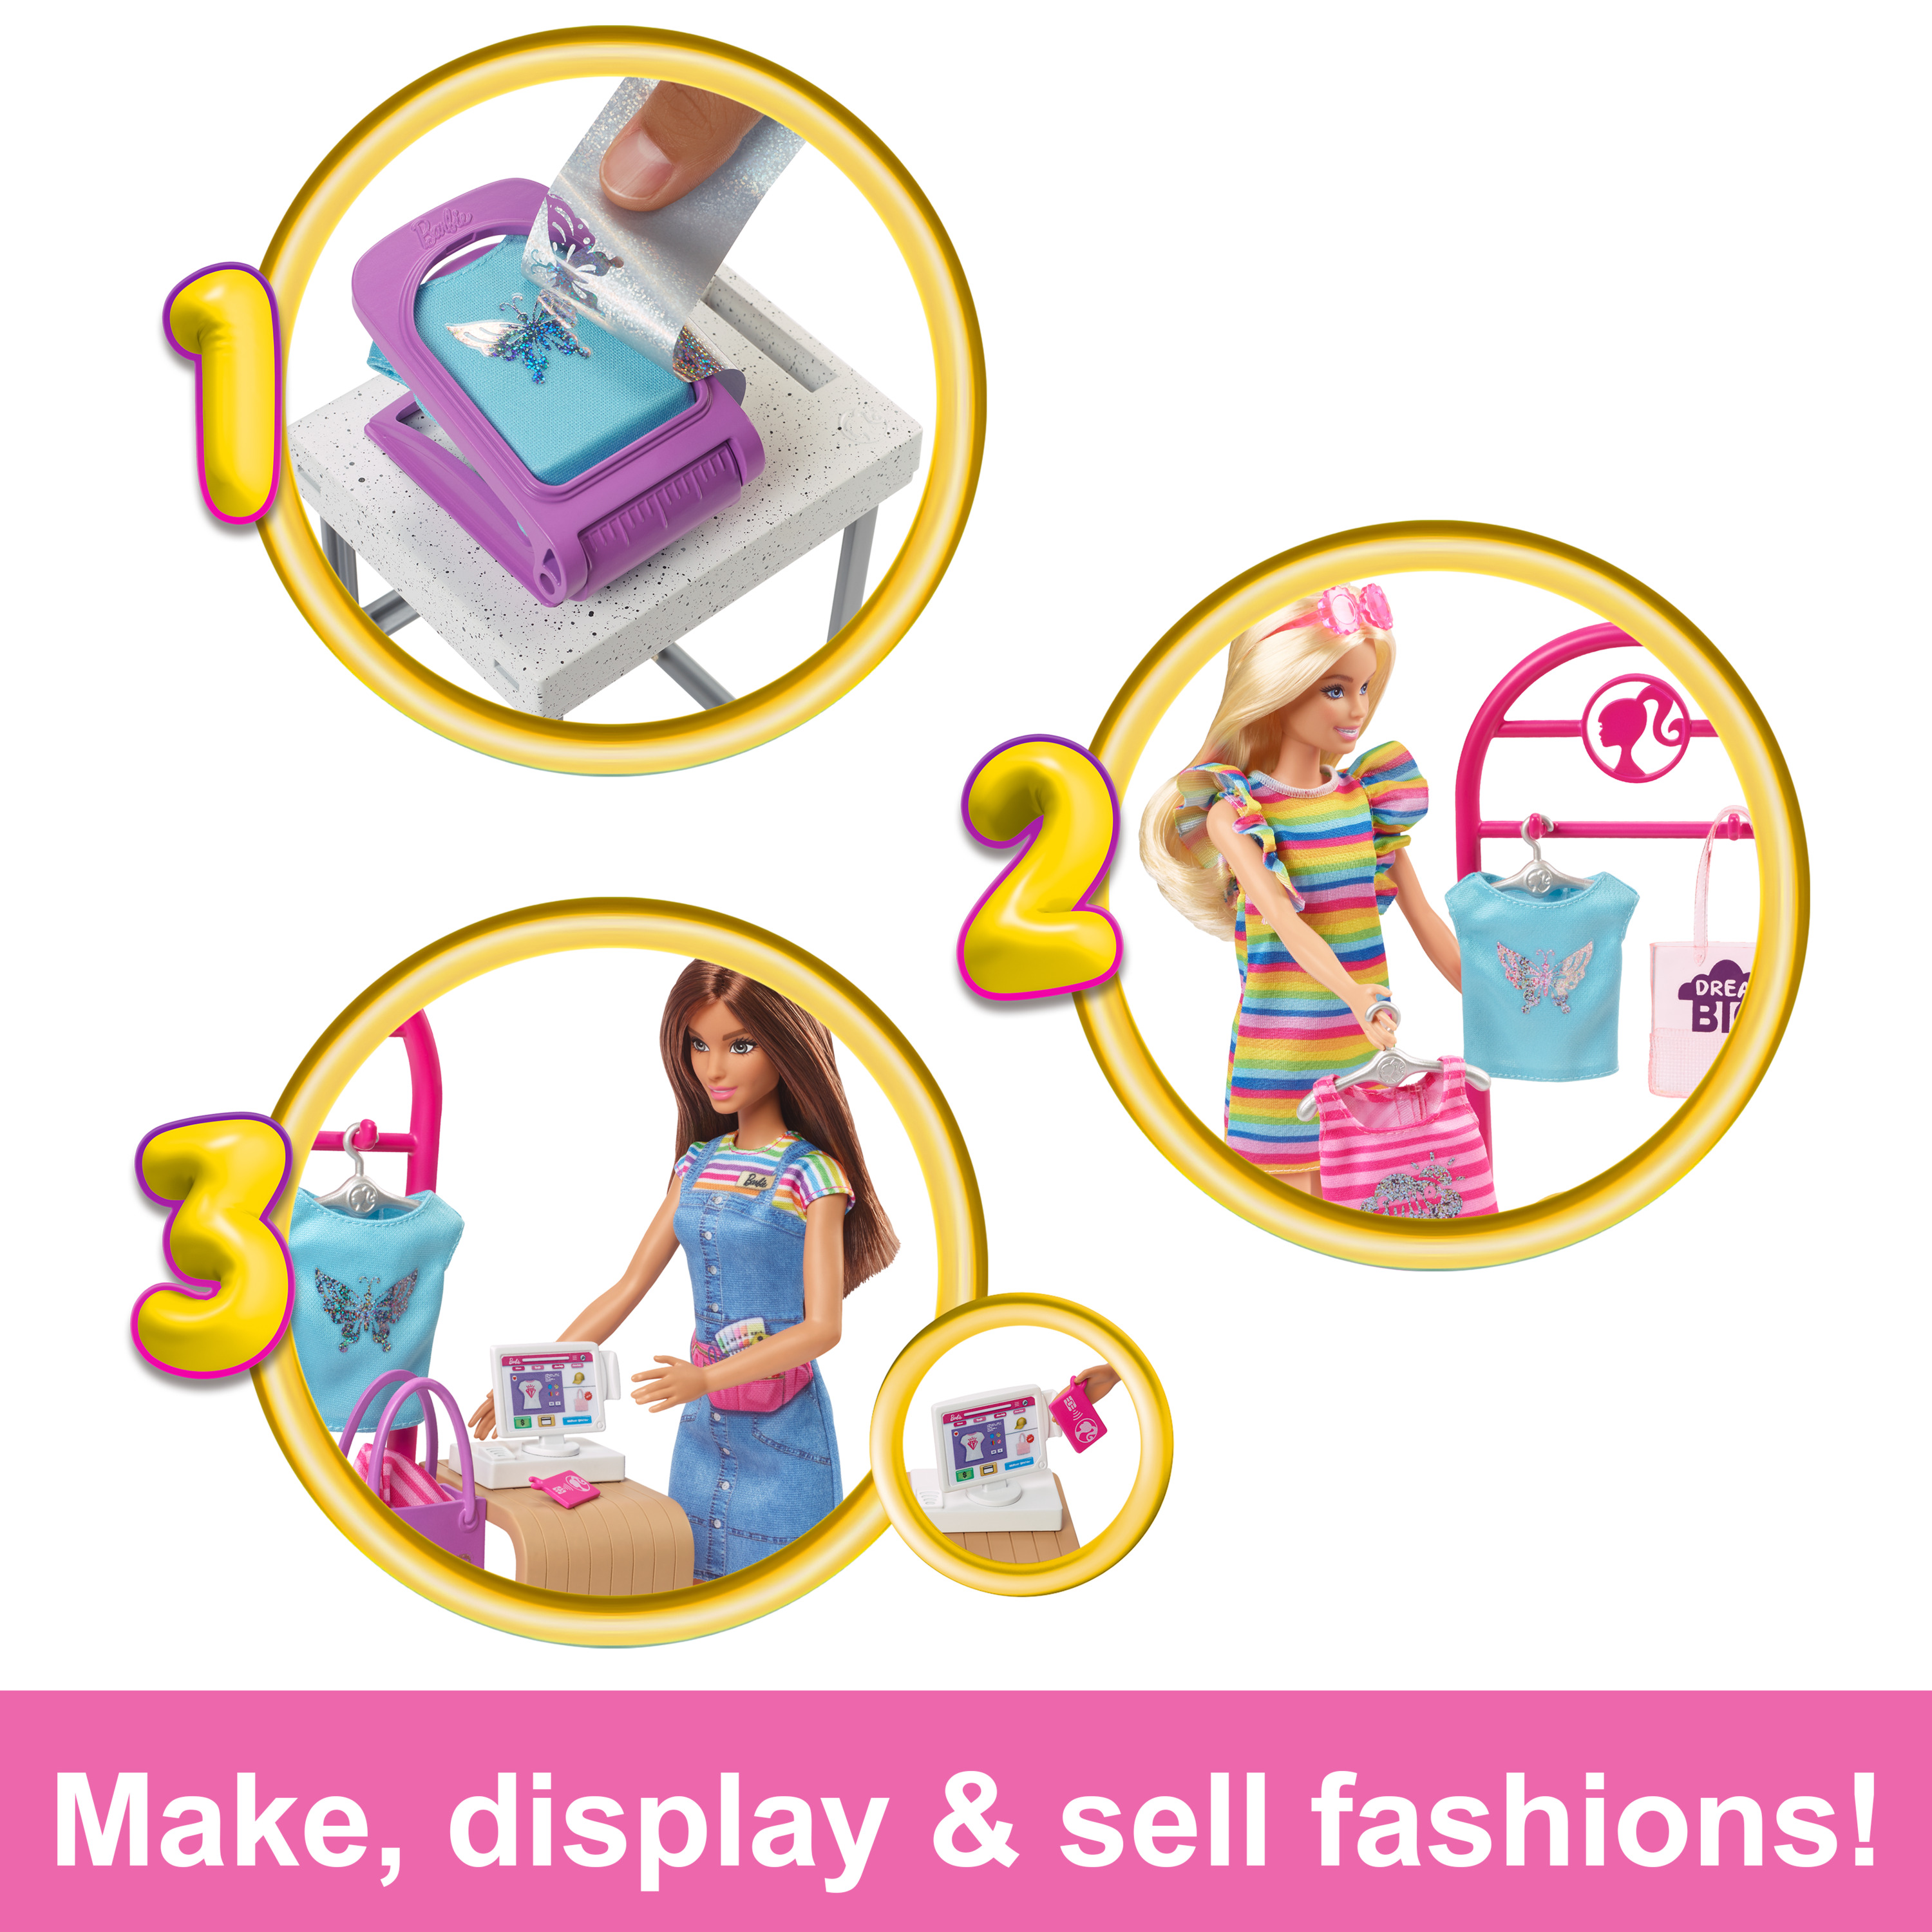 Barbie Make & Sell Boutique Playset with Brunette Doll, Foil Design Tools, Clothes & Accessories - image 4 of 7